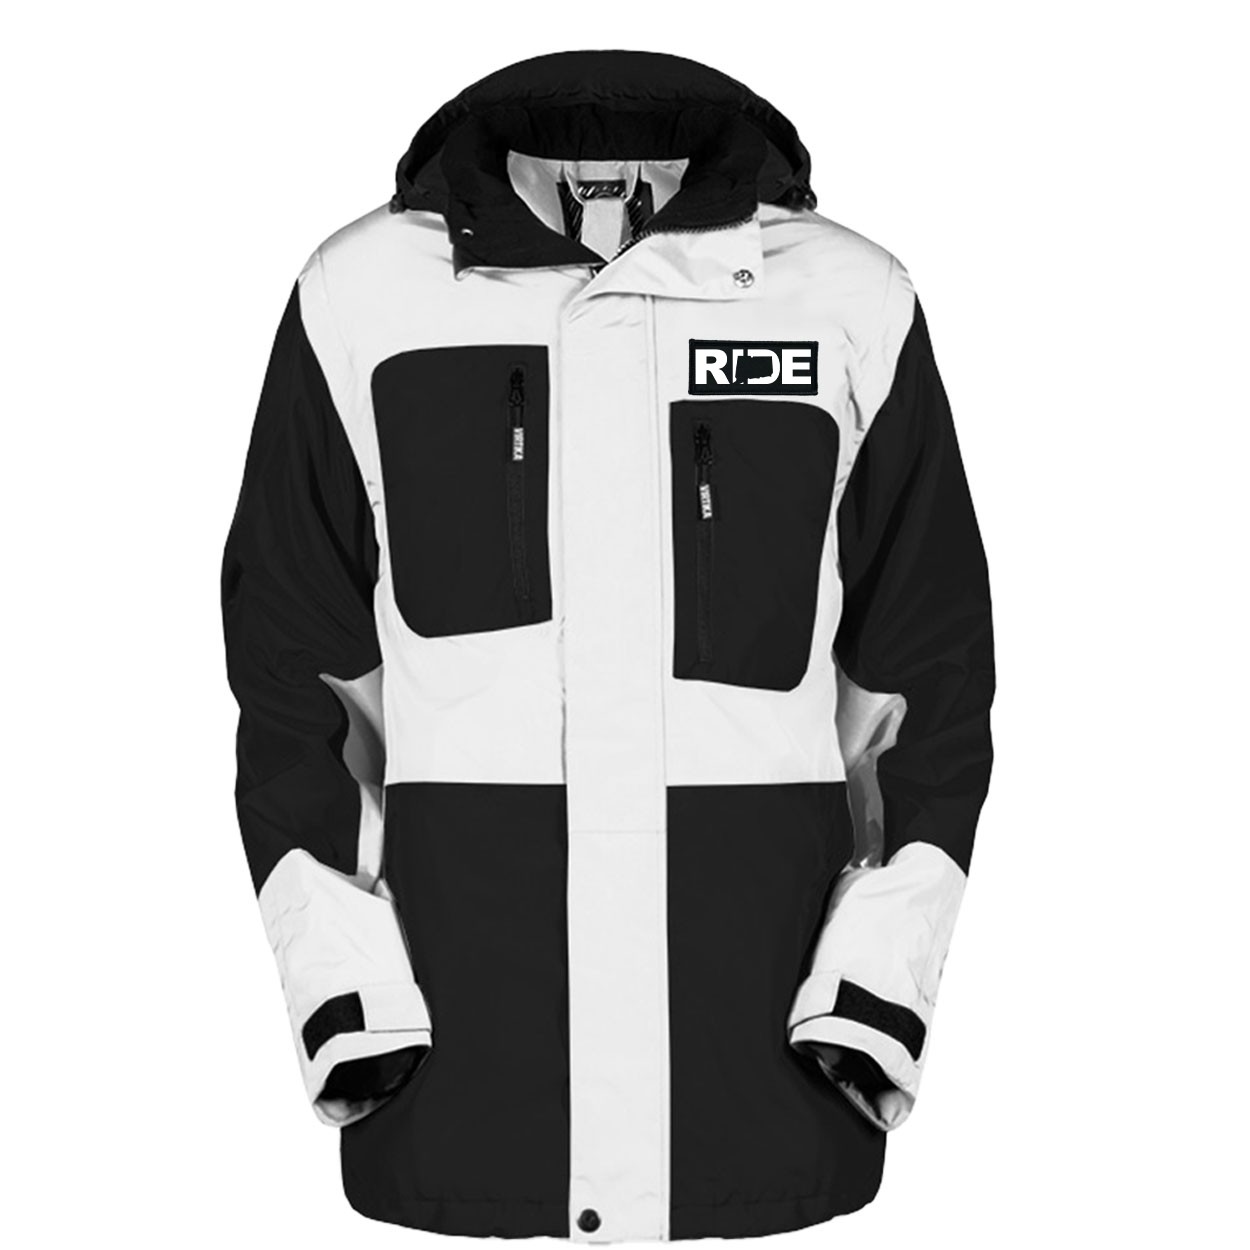 Ride Connecticut Classic Woven Patch Pro Snowboard Jacket (Black/White)